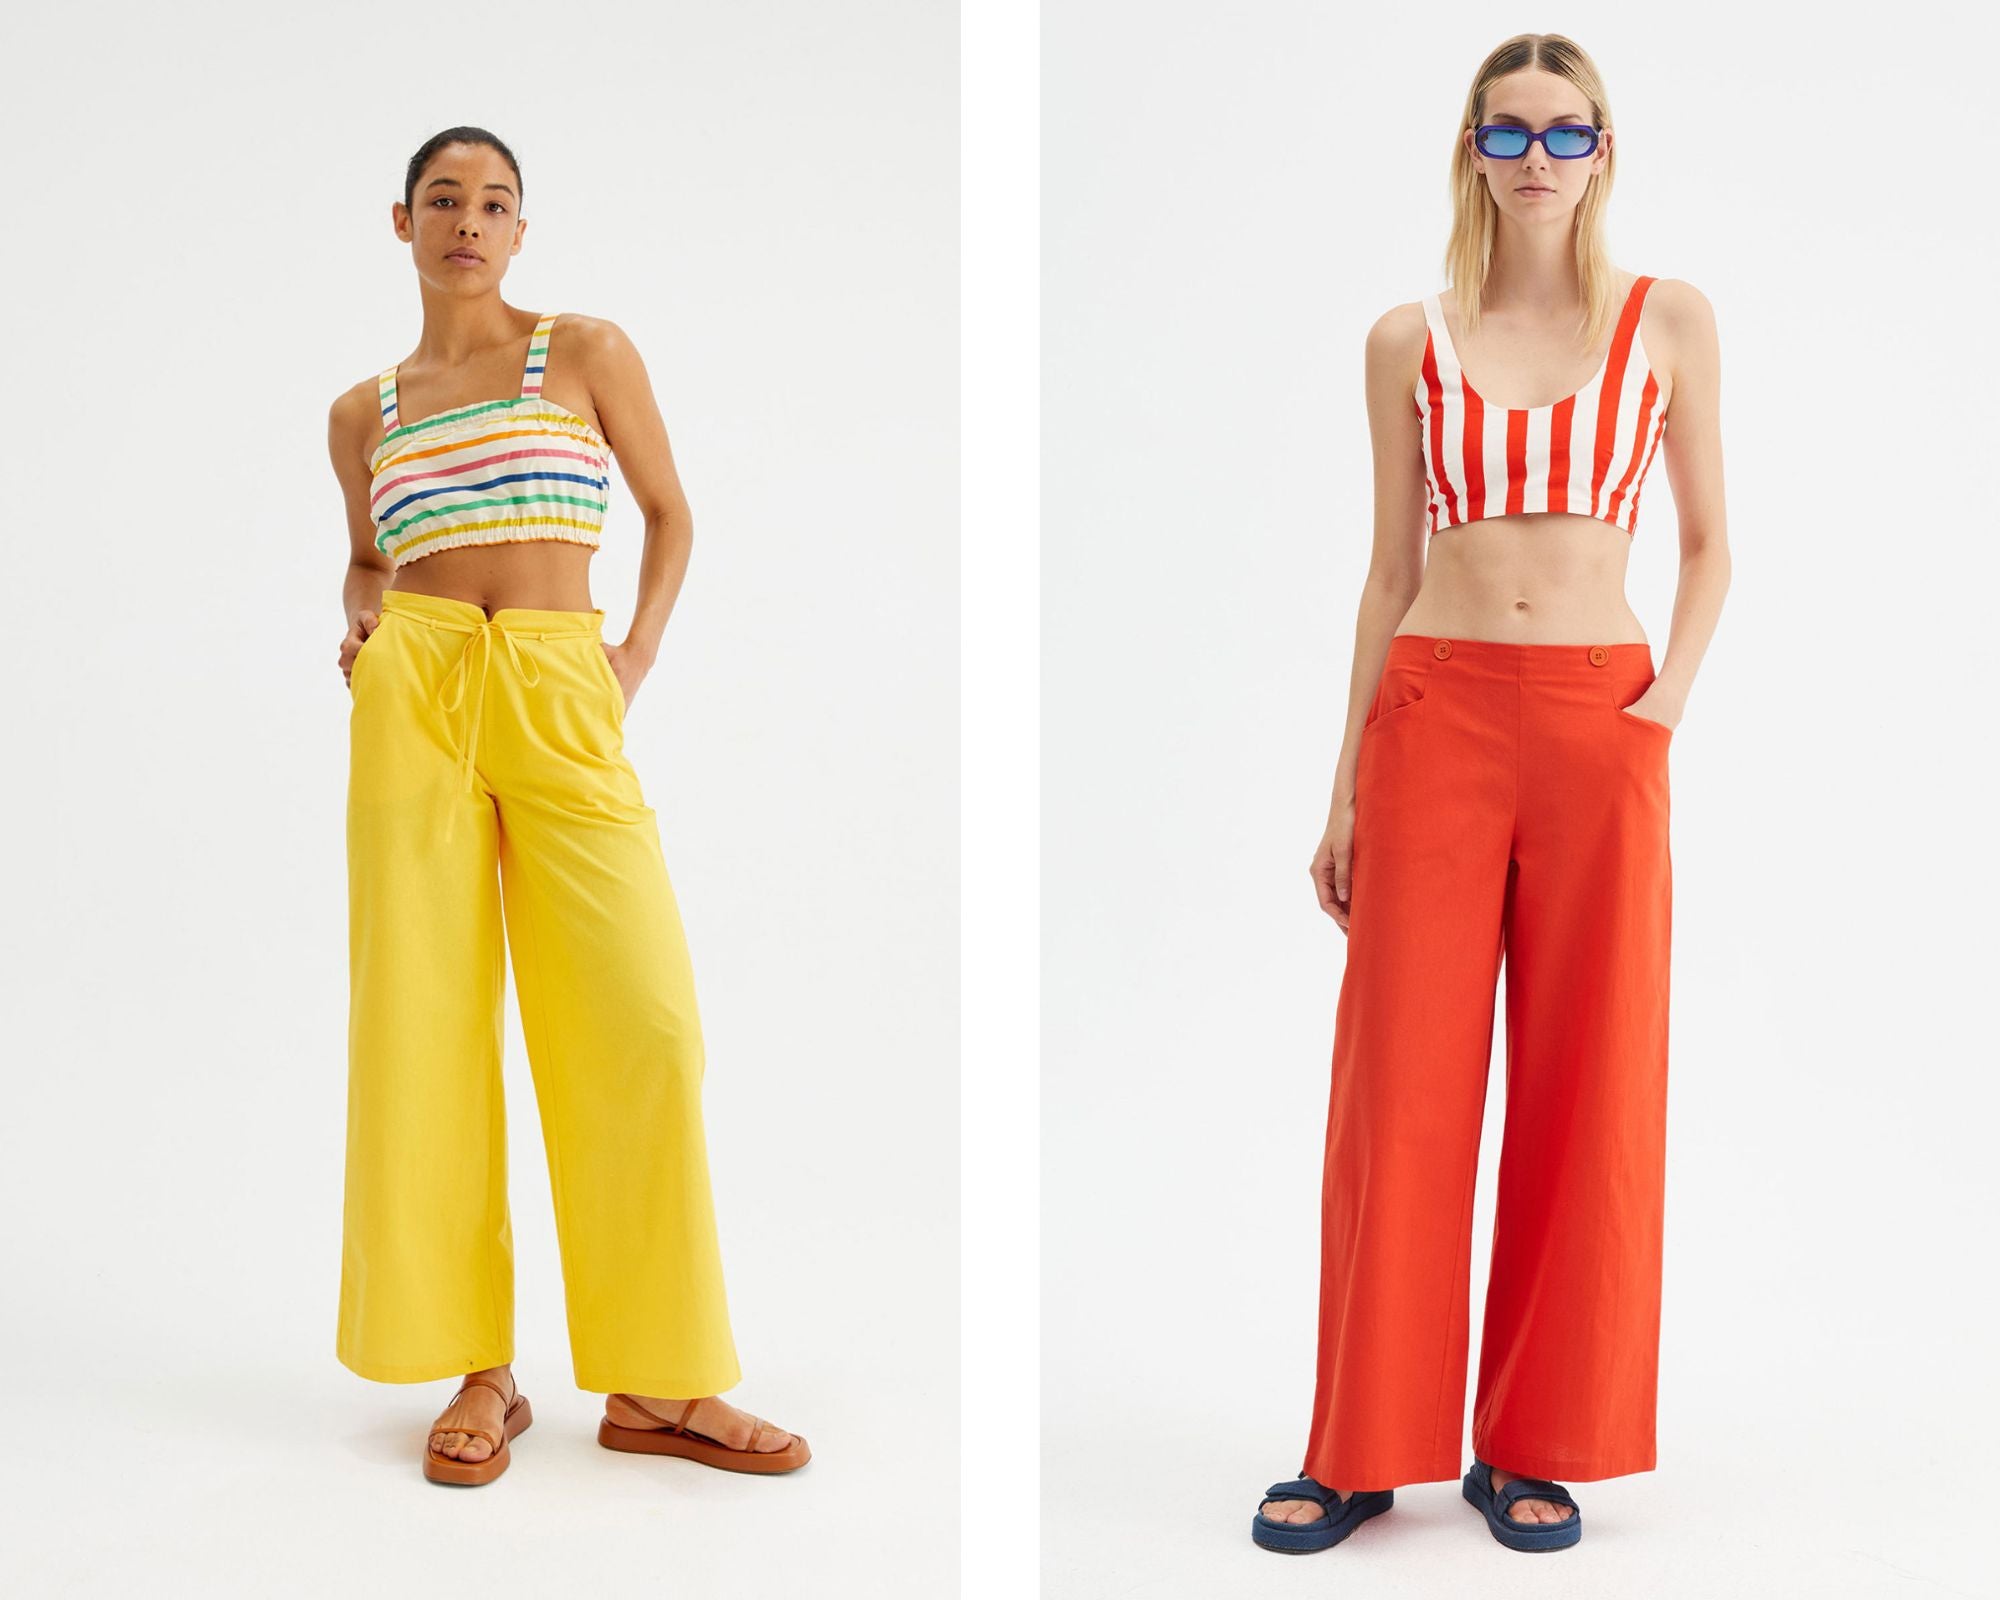 Fantastic Company models with striped tank tops and pants in citrus tones